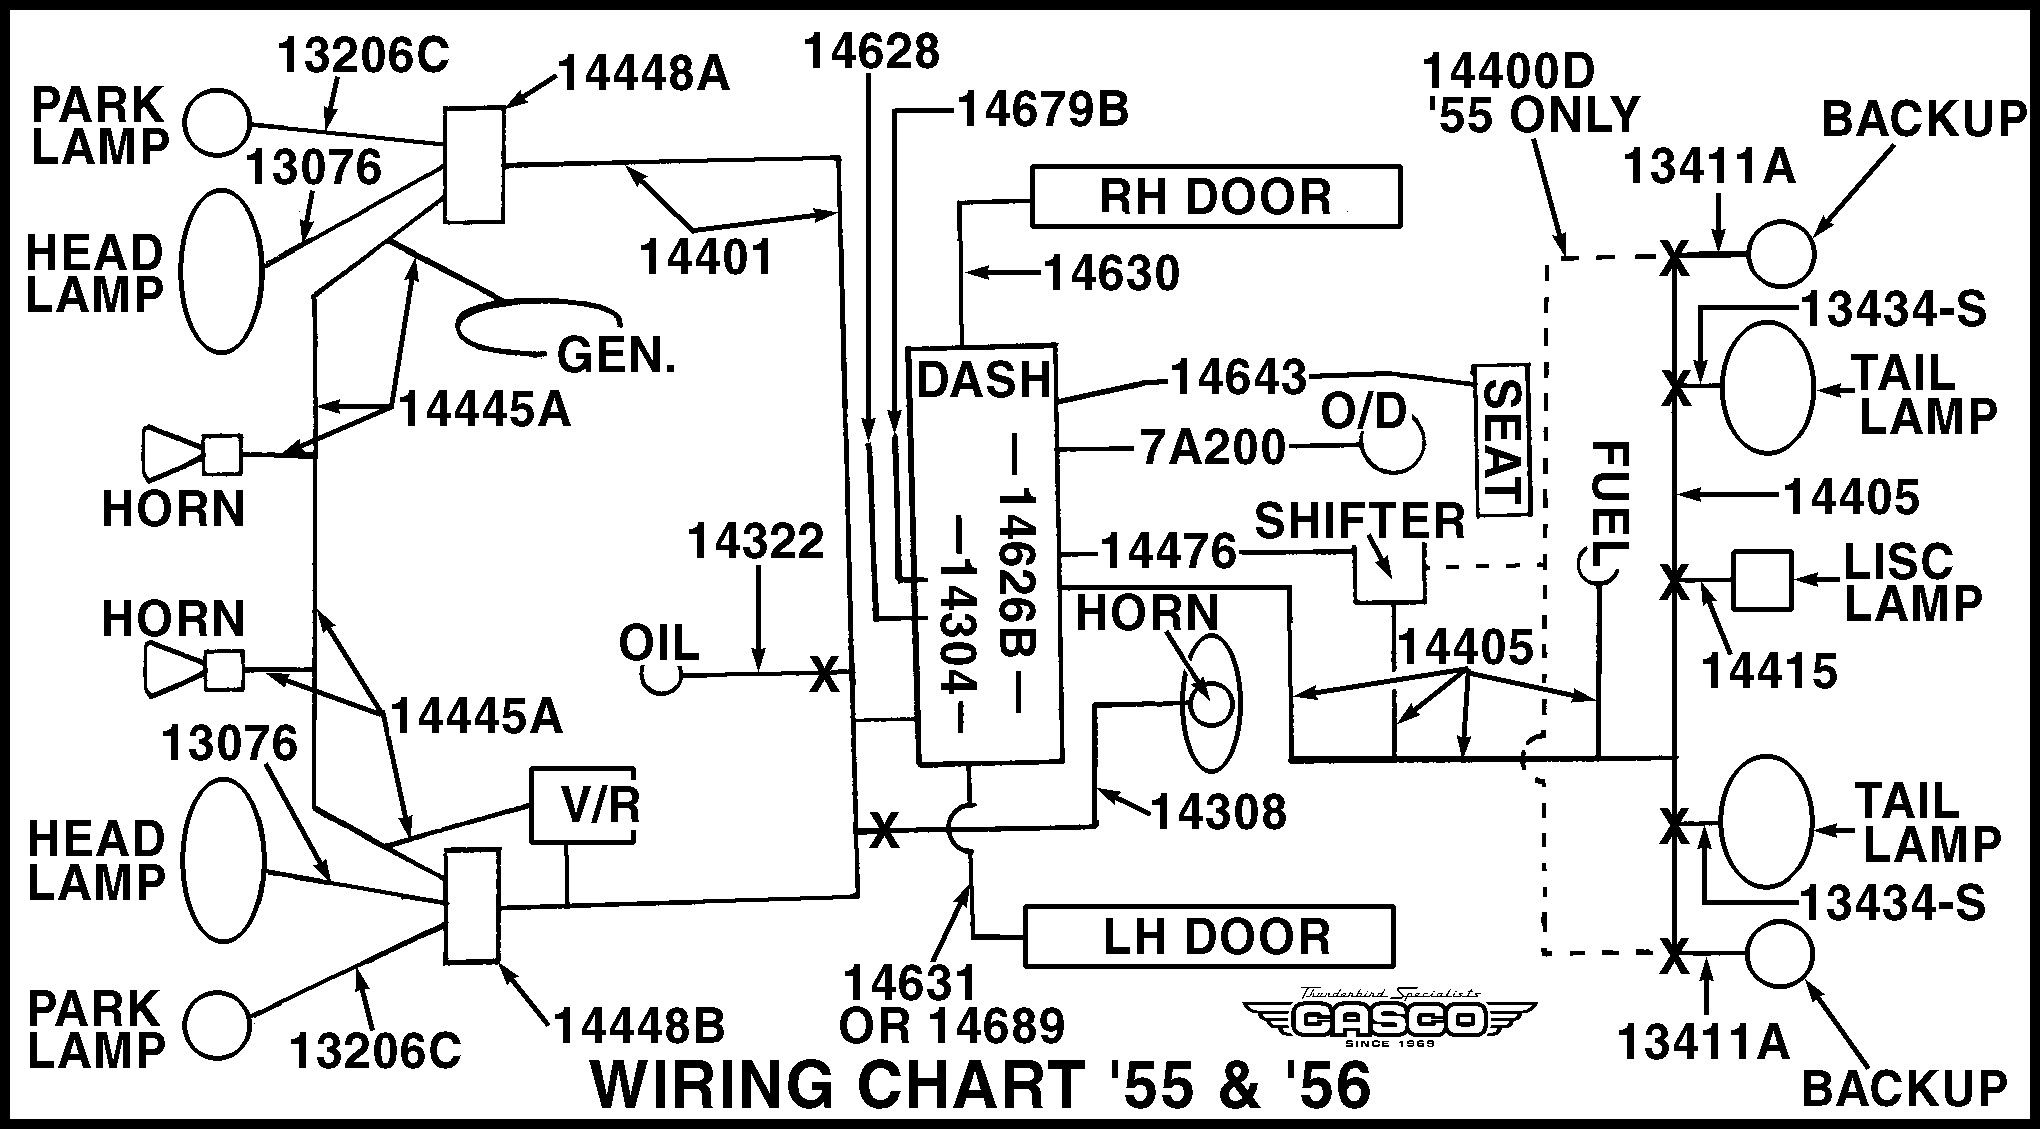 Car assembly Line Diagram Wire assembly Main Harness 55 1 Per Car Classictbird Of Car assembly Line Diagram